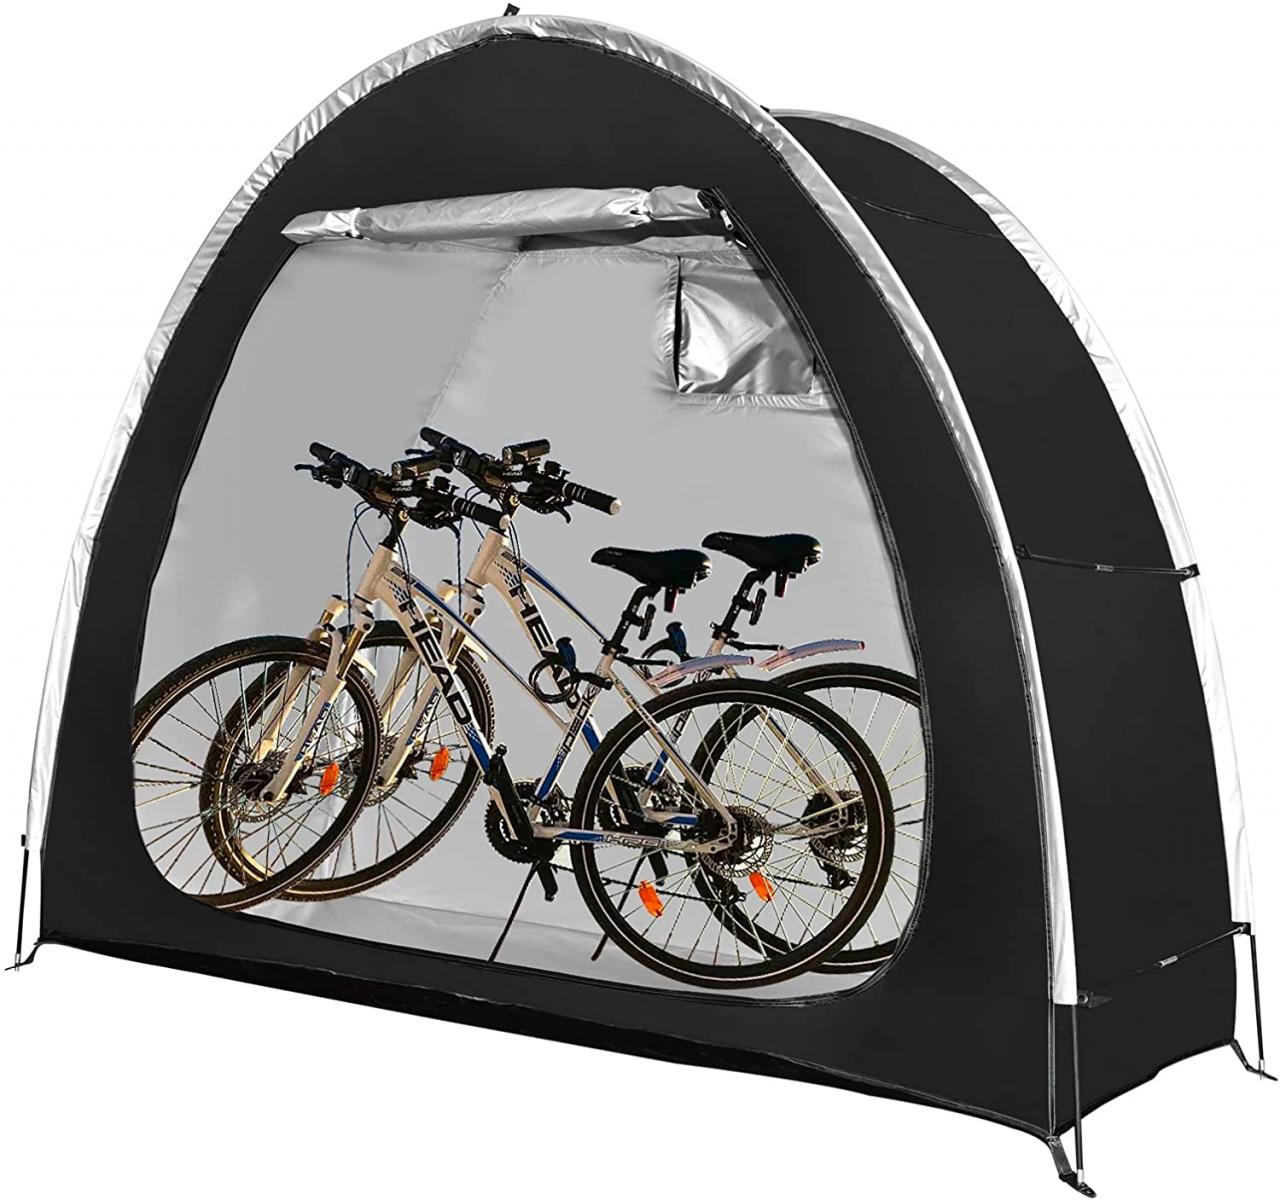 Buy AiQueen Bike Tent Foldable Bike Storage Shed Waterproof Porable Bicycle  Storage Cover Shelter with Window for Outdoor,Garden,Camping and Hiking  Online in Indonesia. B08W41SMZ9